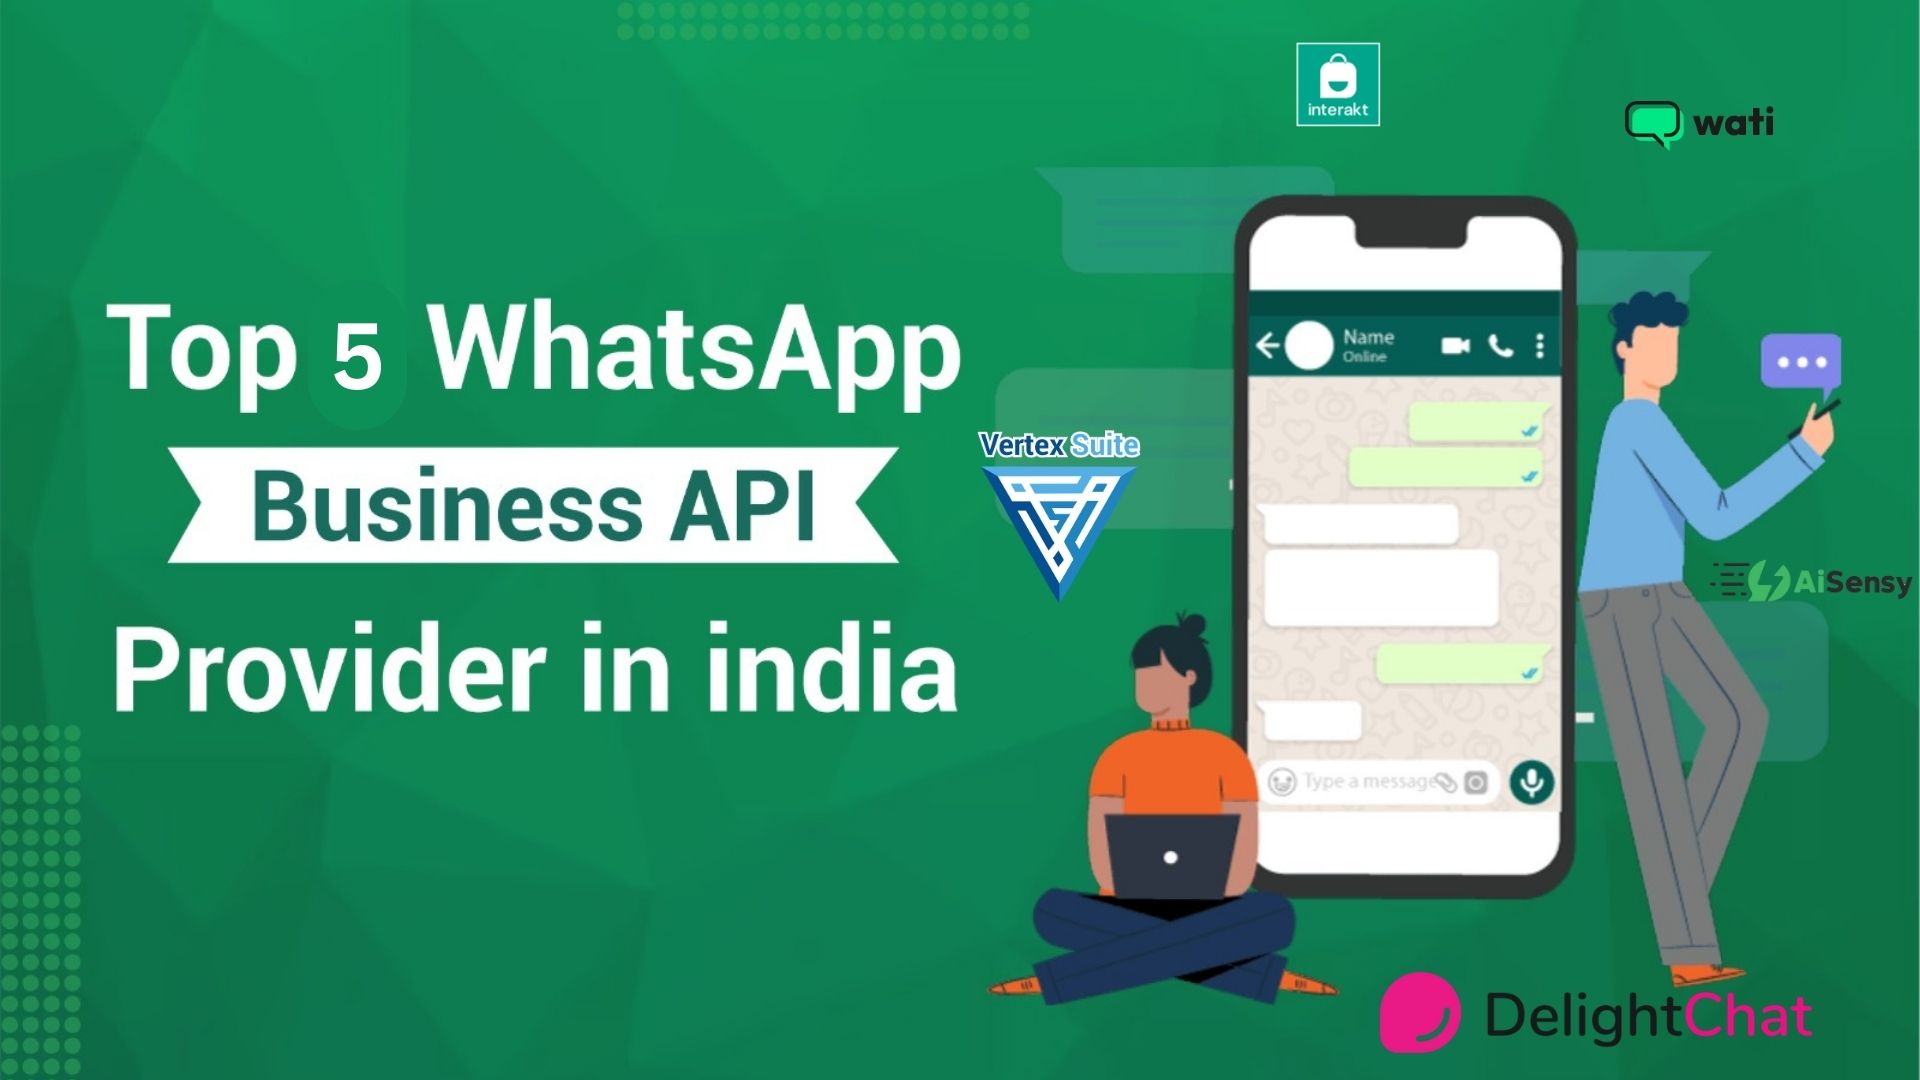 Top 5 WhatsApp Business provider in India